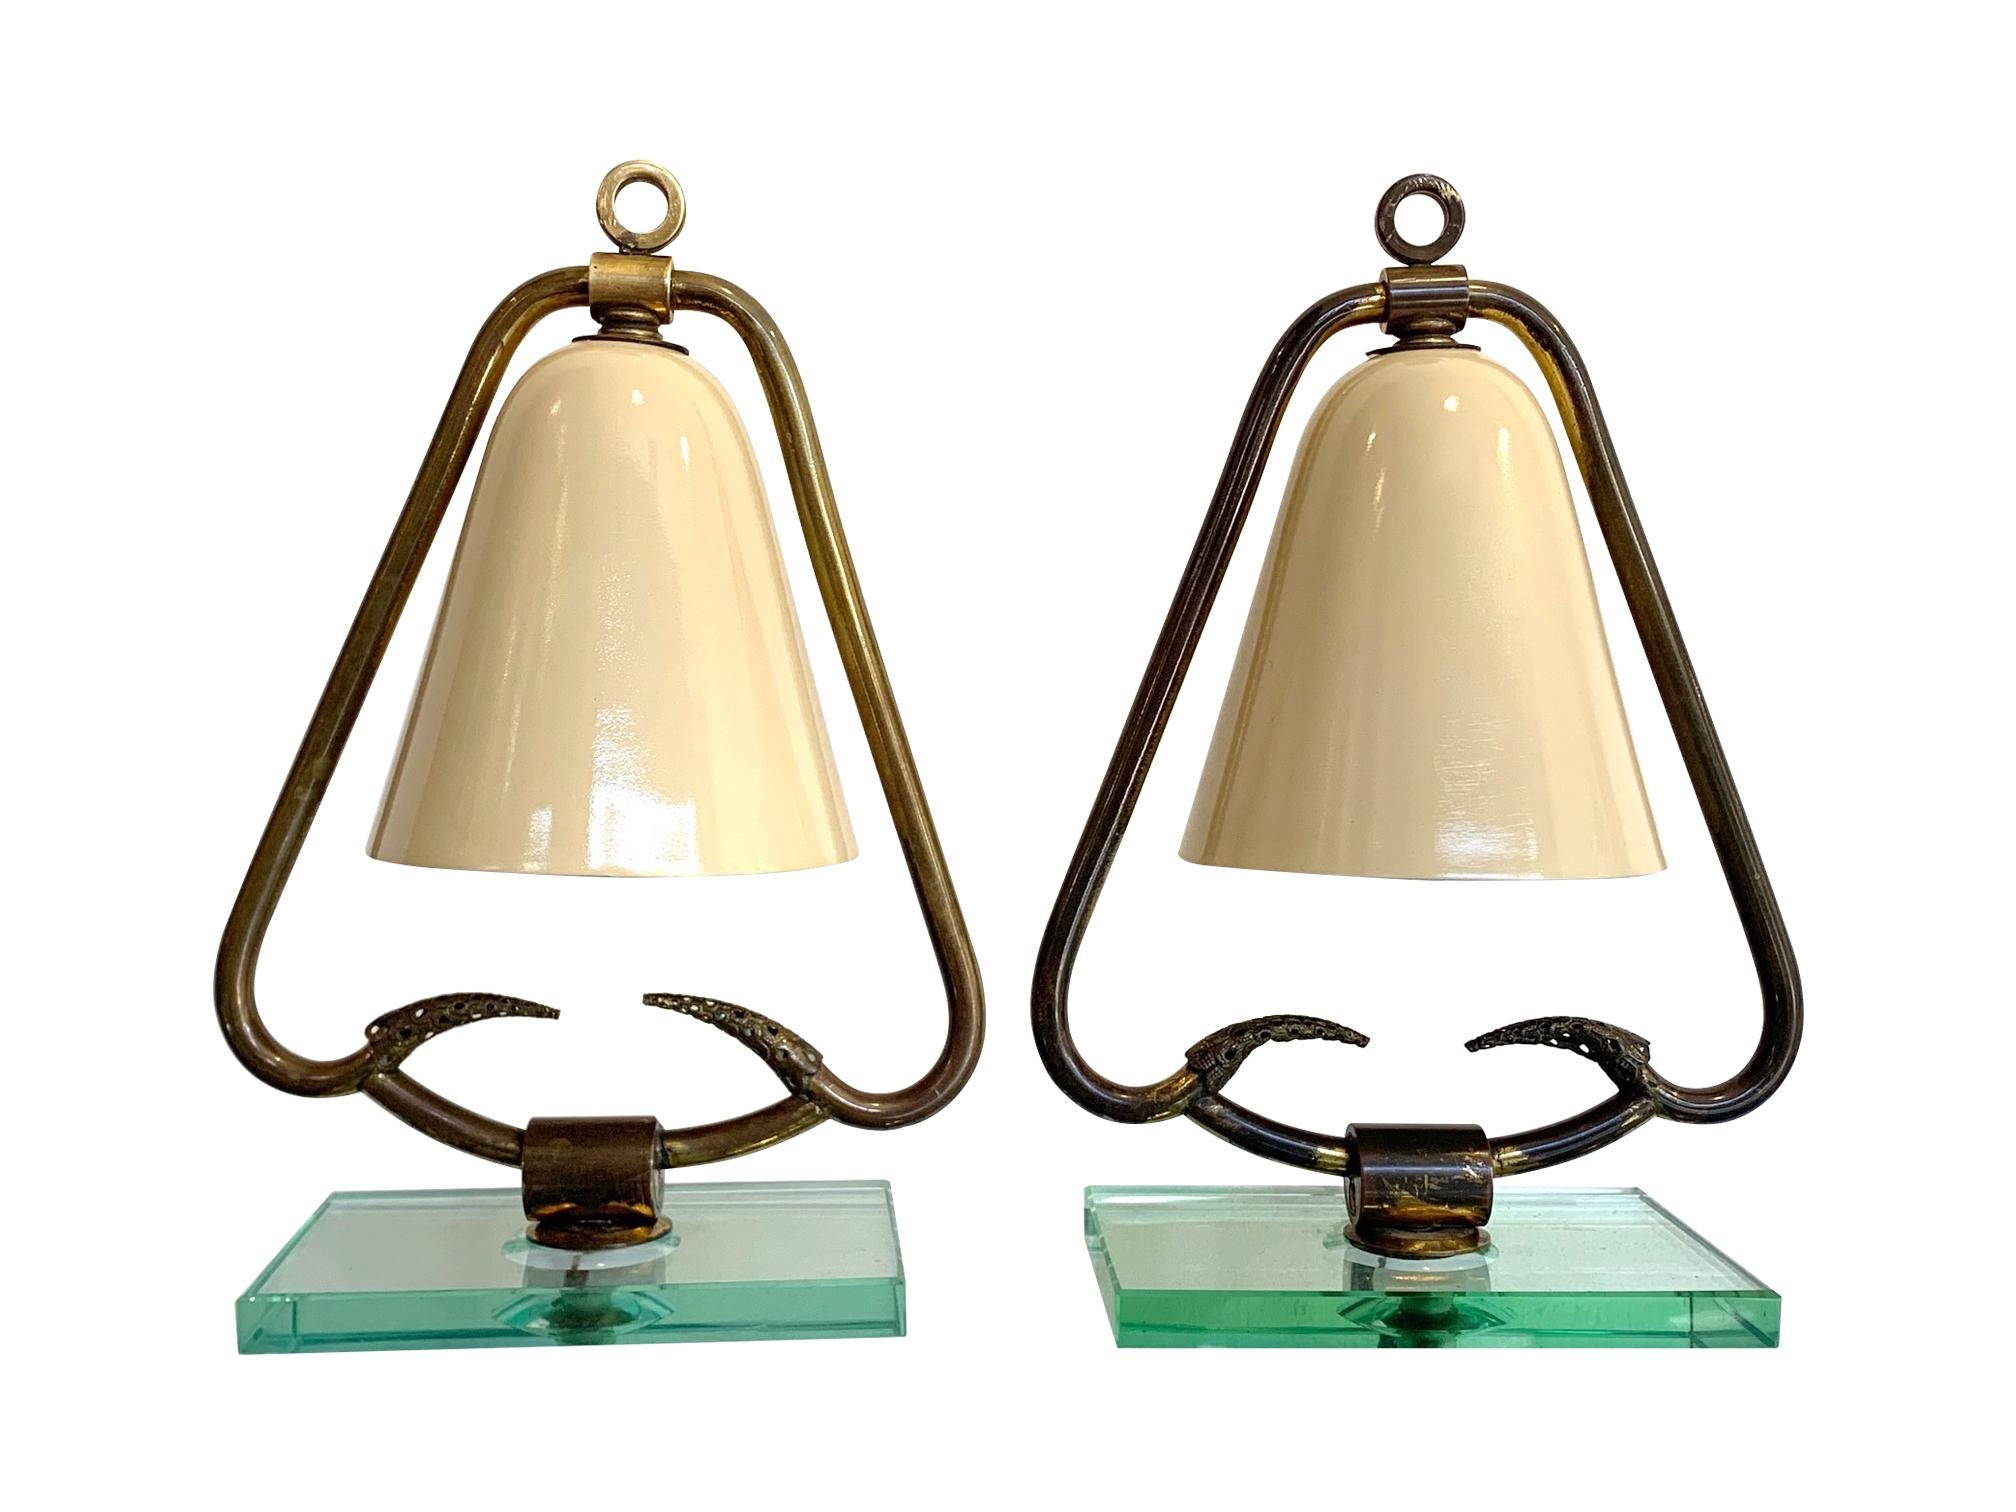 Pair of 1950s Italian Lamps with Enamel Shades on Brass Frame Mounted on Glass 1